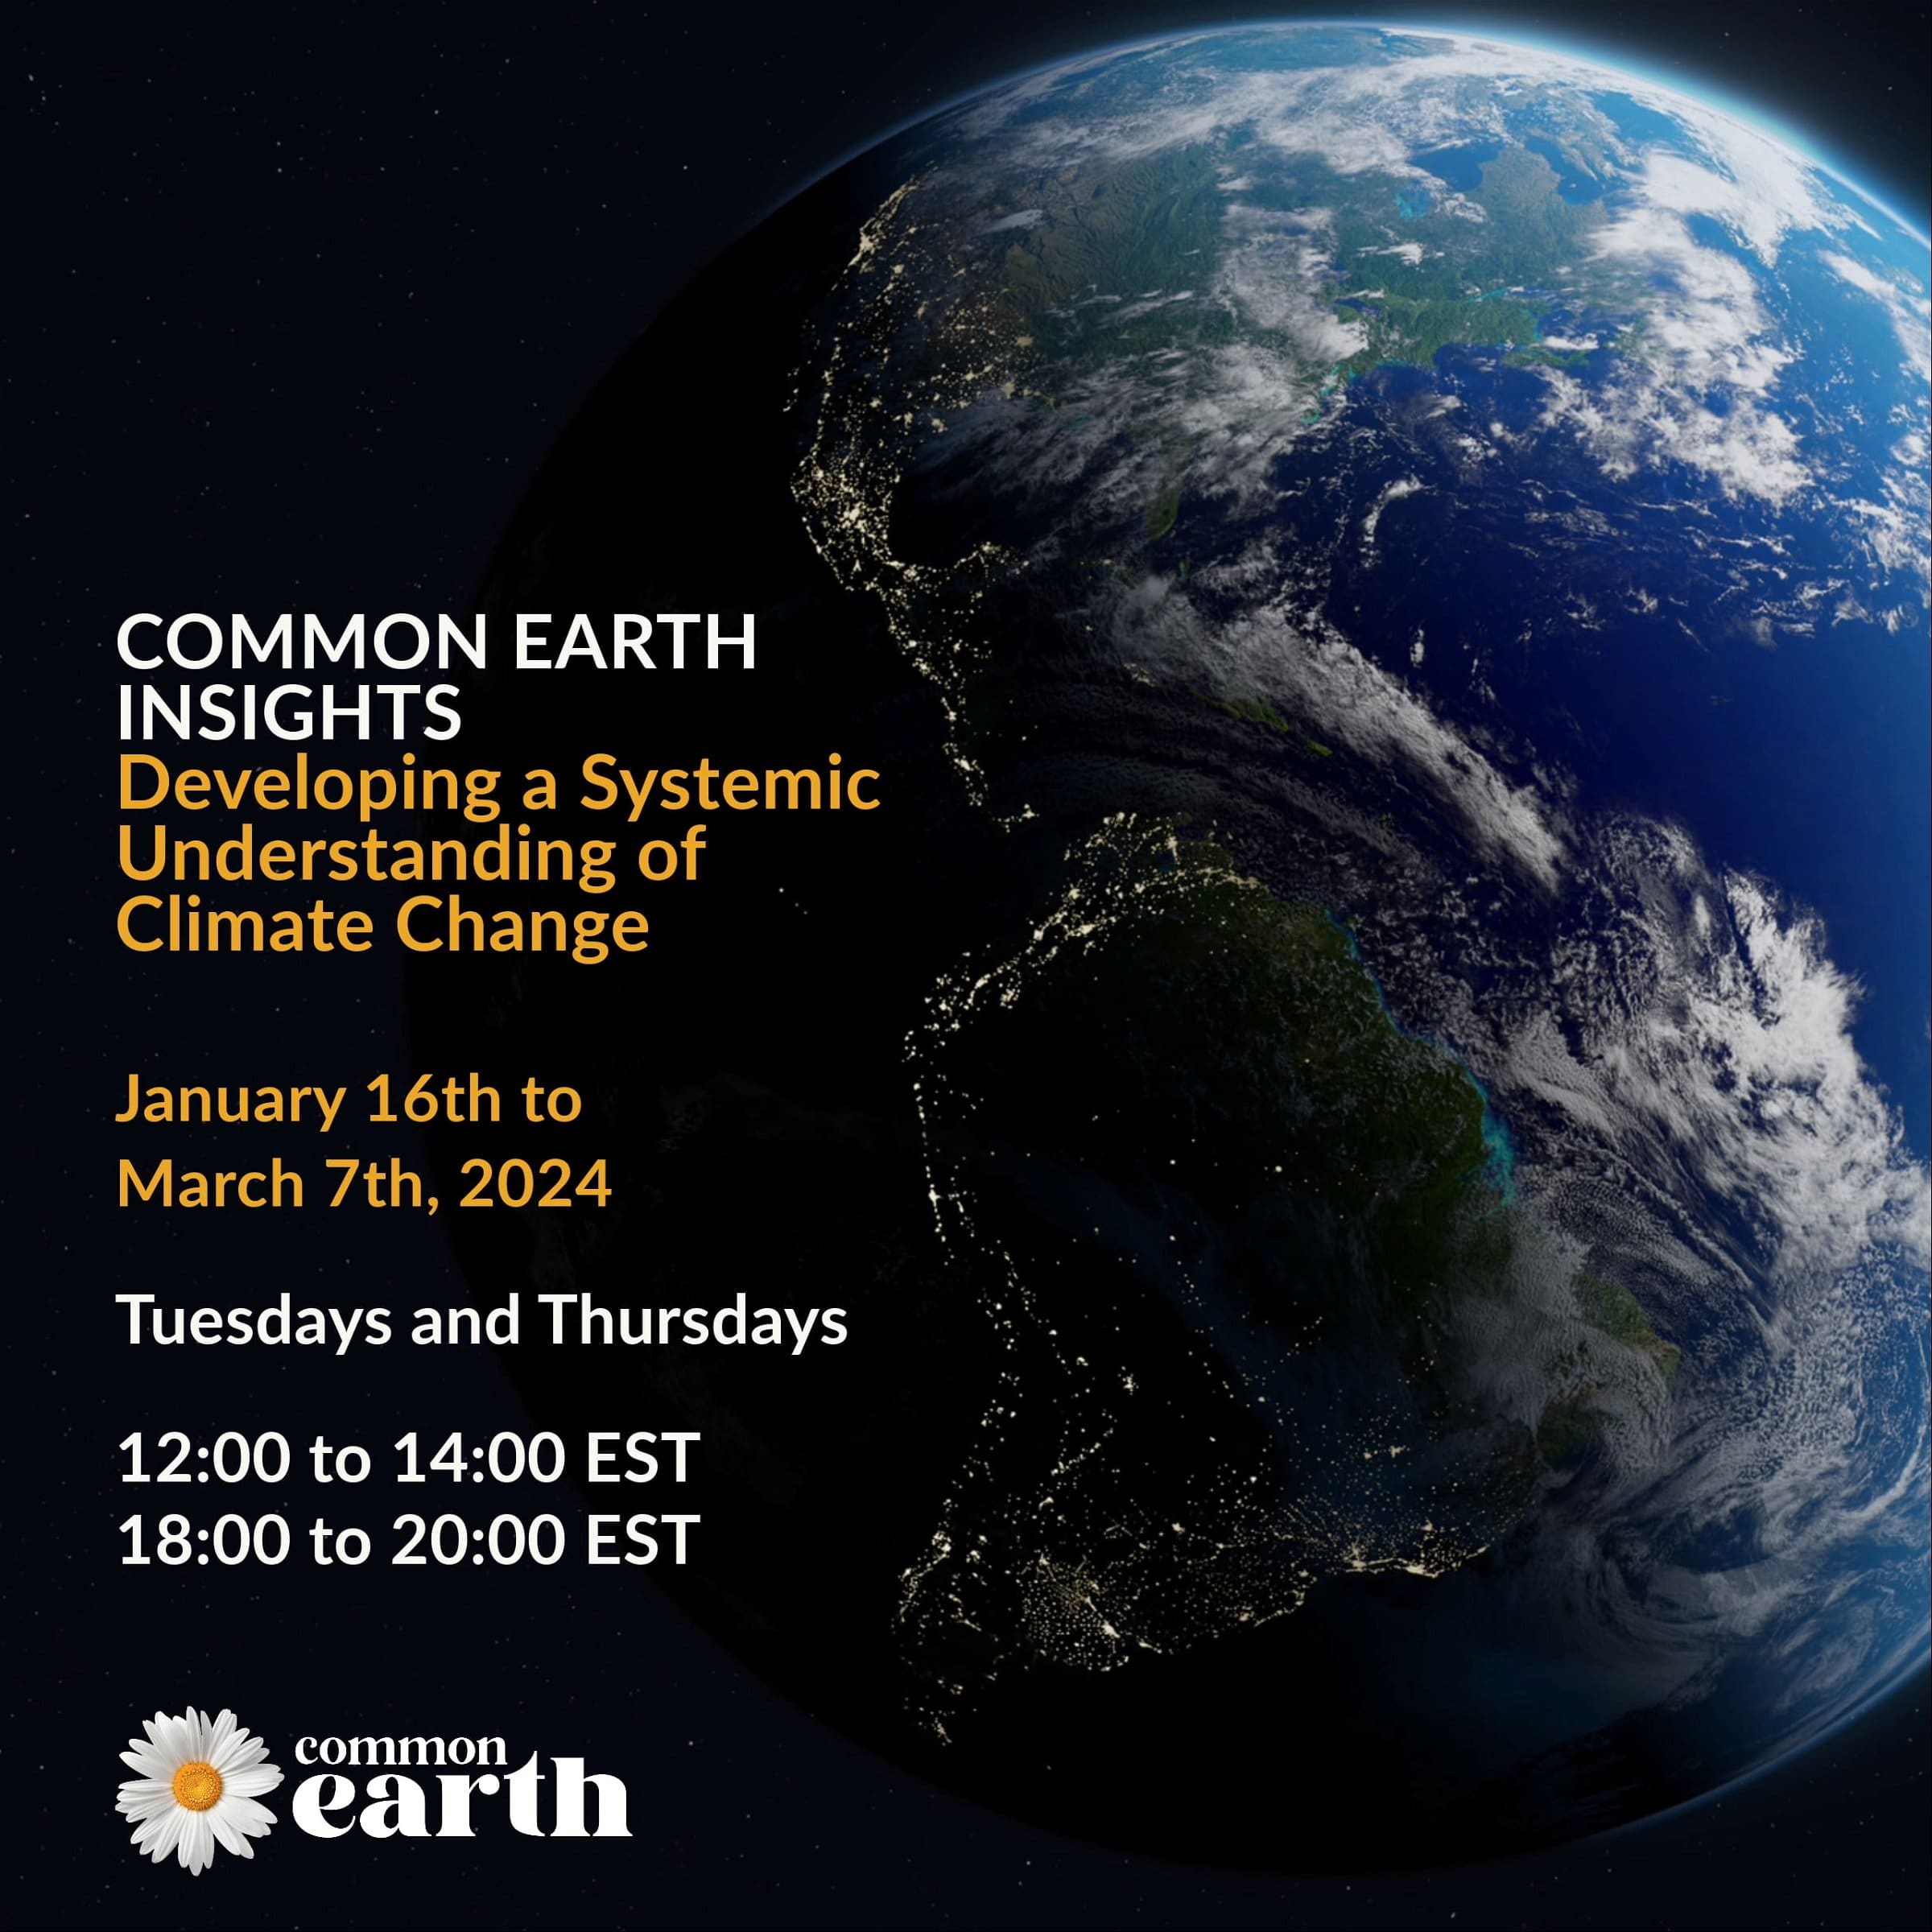 Common Earth Insights Course: Developing a Systemic Understanding of Climate Change